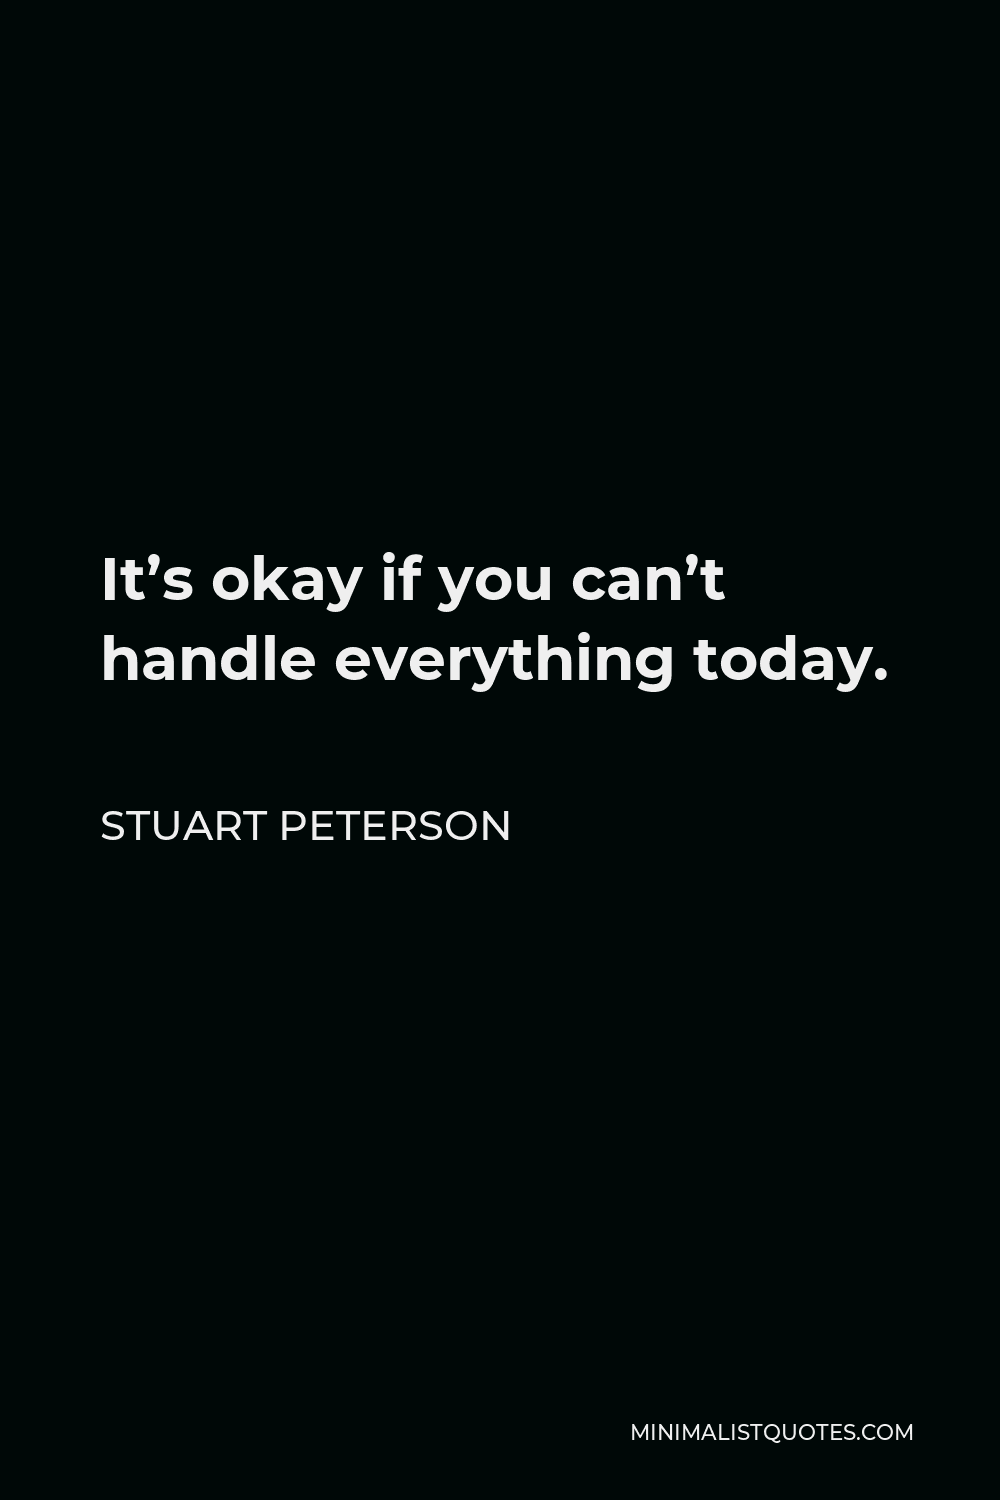 Stuart Peterson Quote - It’s okay if you can’t handle everything today.